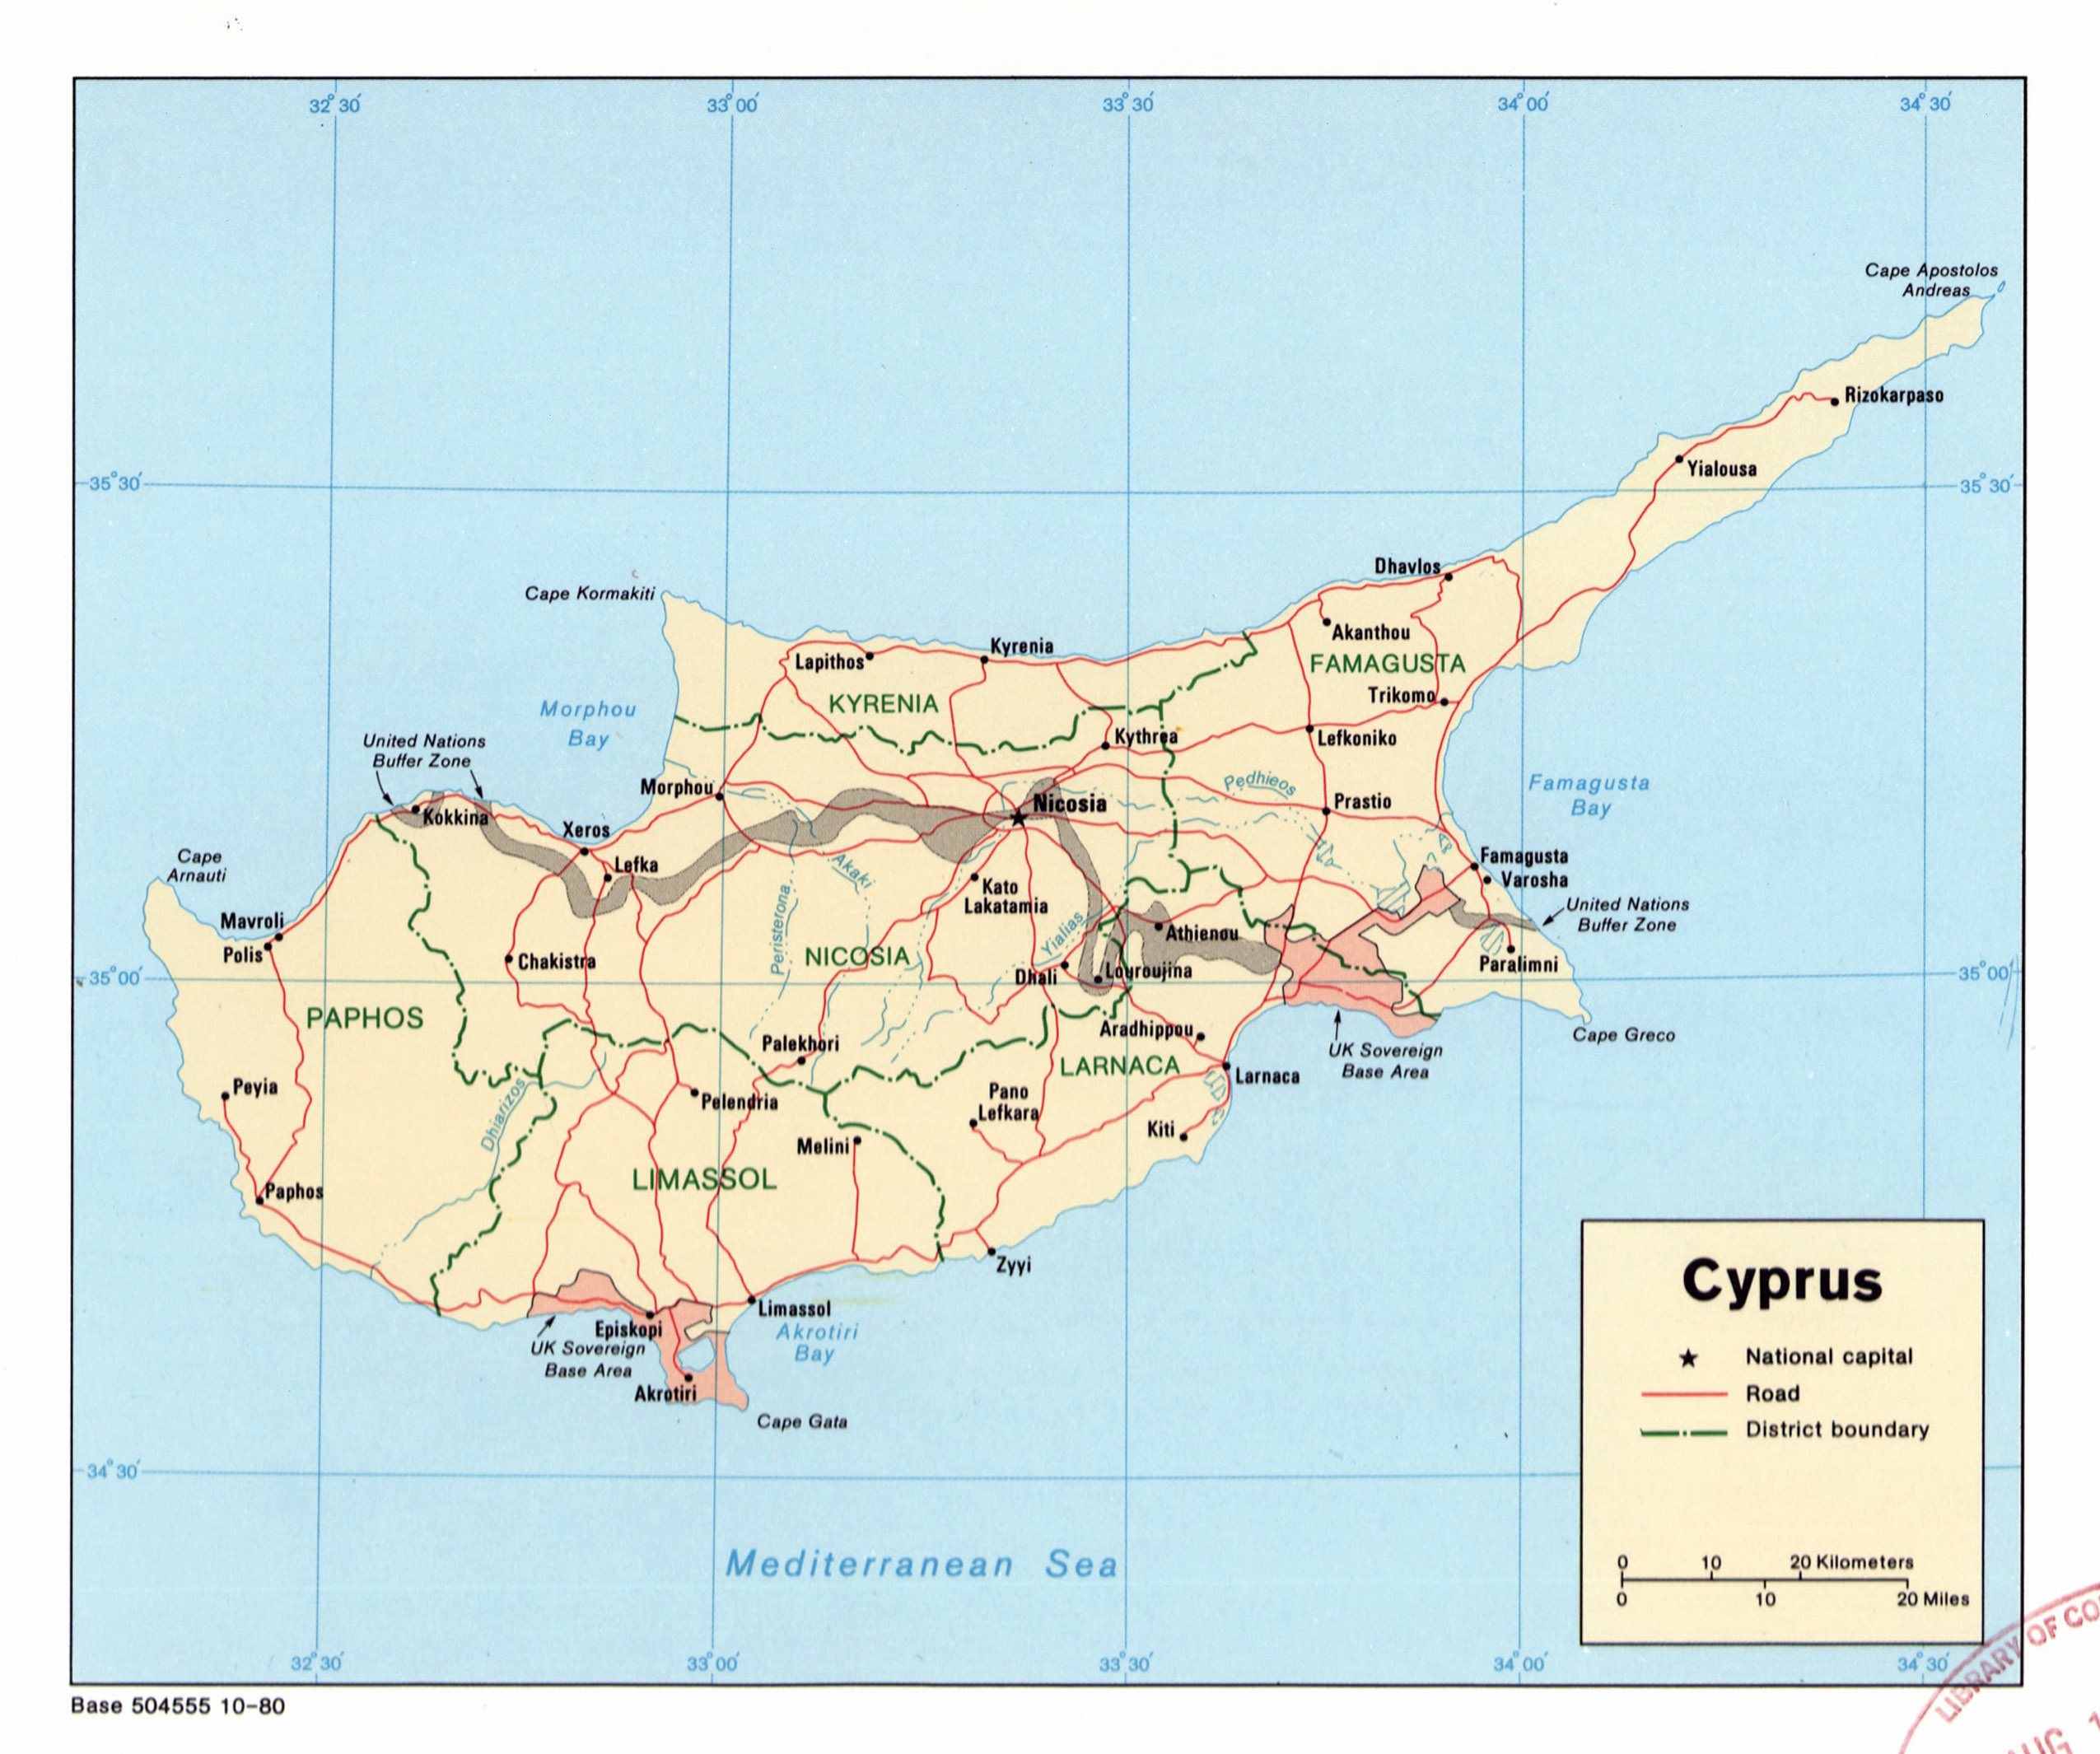 Cyprus Political Map With Roads And Glossy Map Icons Detail | Images ...